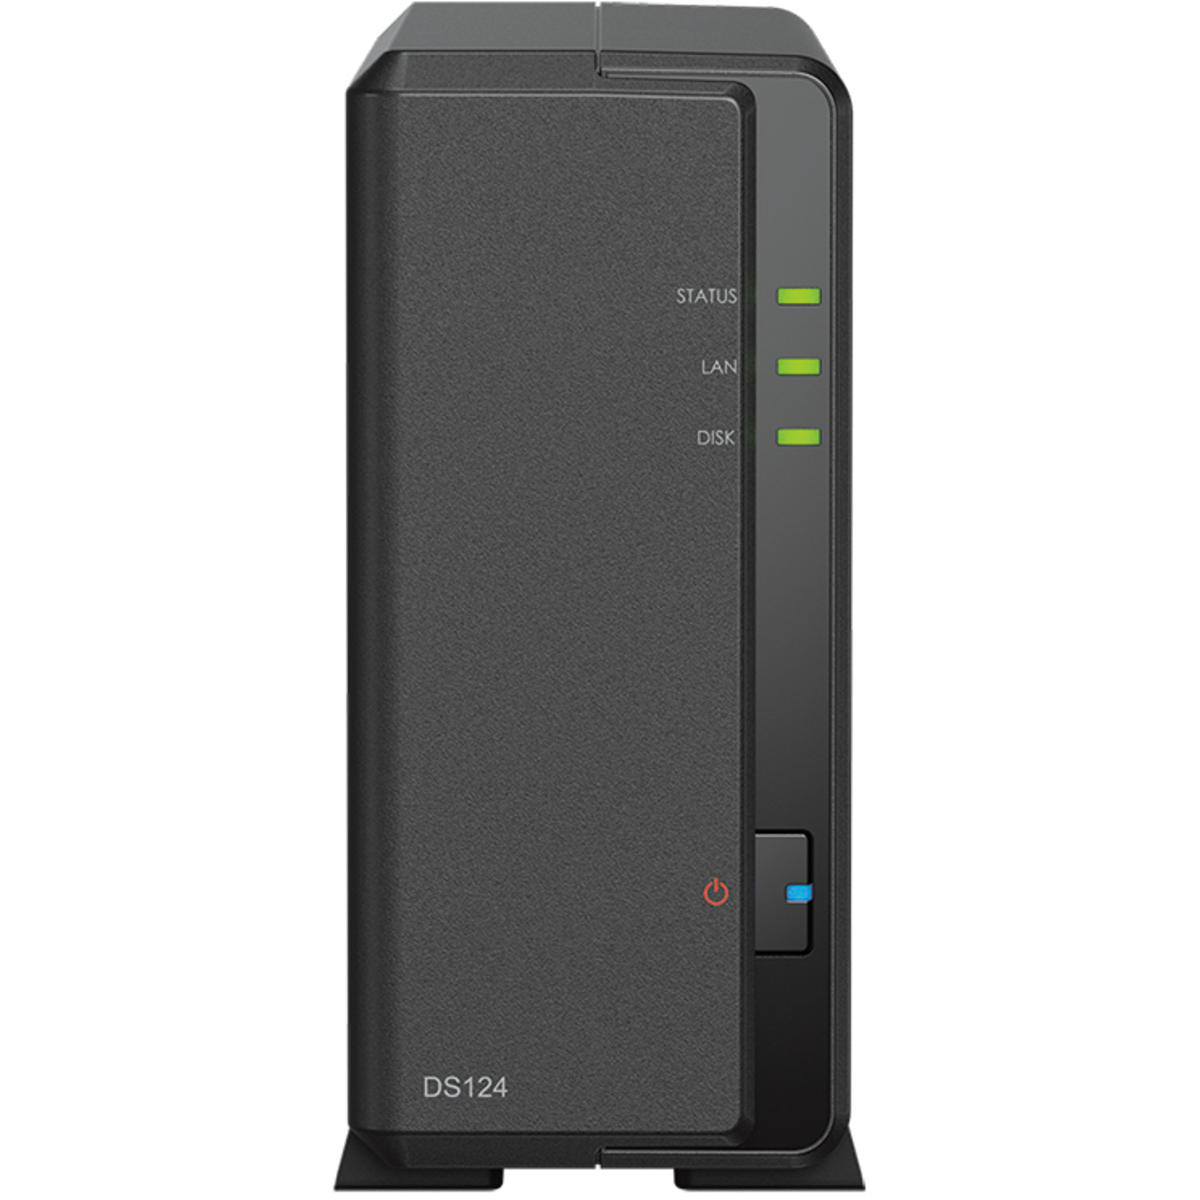 buy Synology DiskStation DS124 4tb Desktop NAS - Network Attached Storage Device 1x4000gb Seagate BarraCuda ST4000DM004 3.5 7200rpm SATA 6Gb/s HDD CONSUMER Class Drives Installed - Burn-In Tested - nas headquarters buy network attached storage server device das new raid-5 free shipping simply usa DiskStation DS124